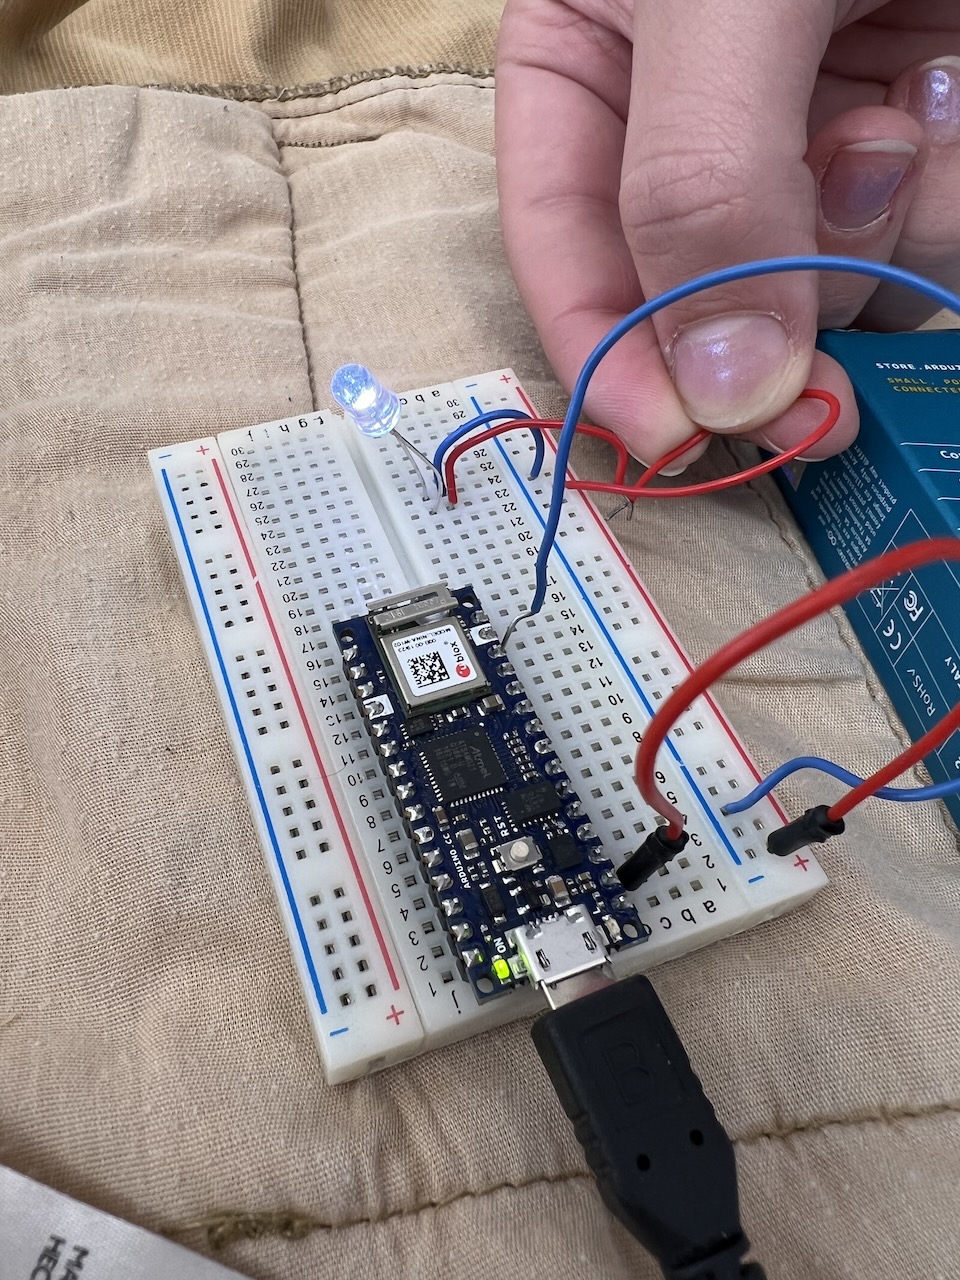 More simply-wired breadboard